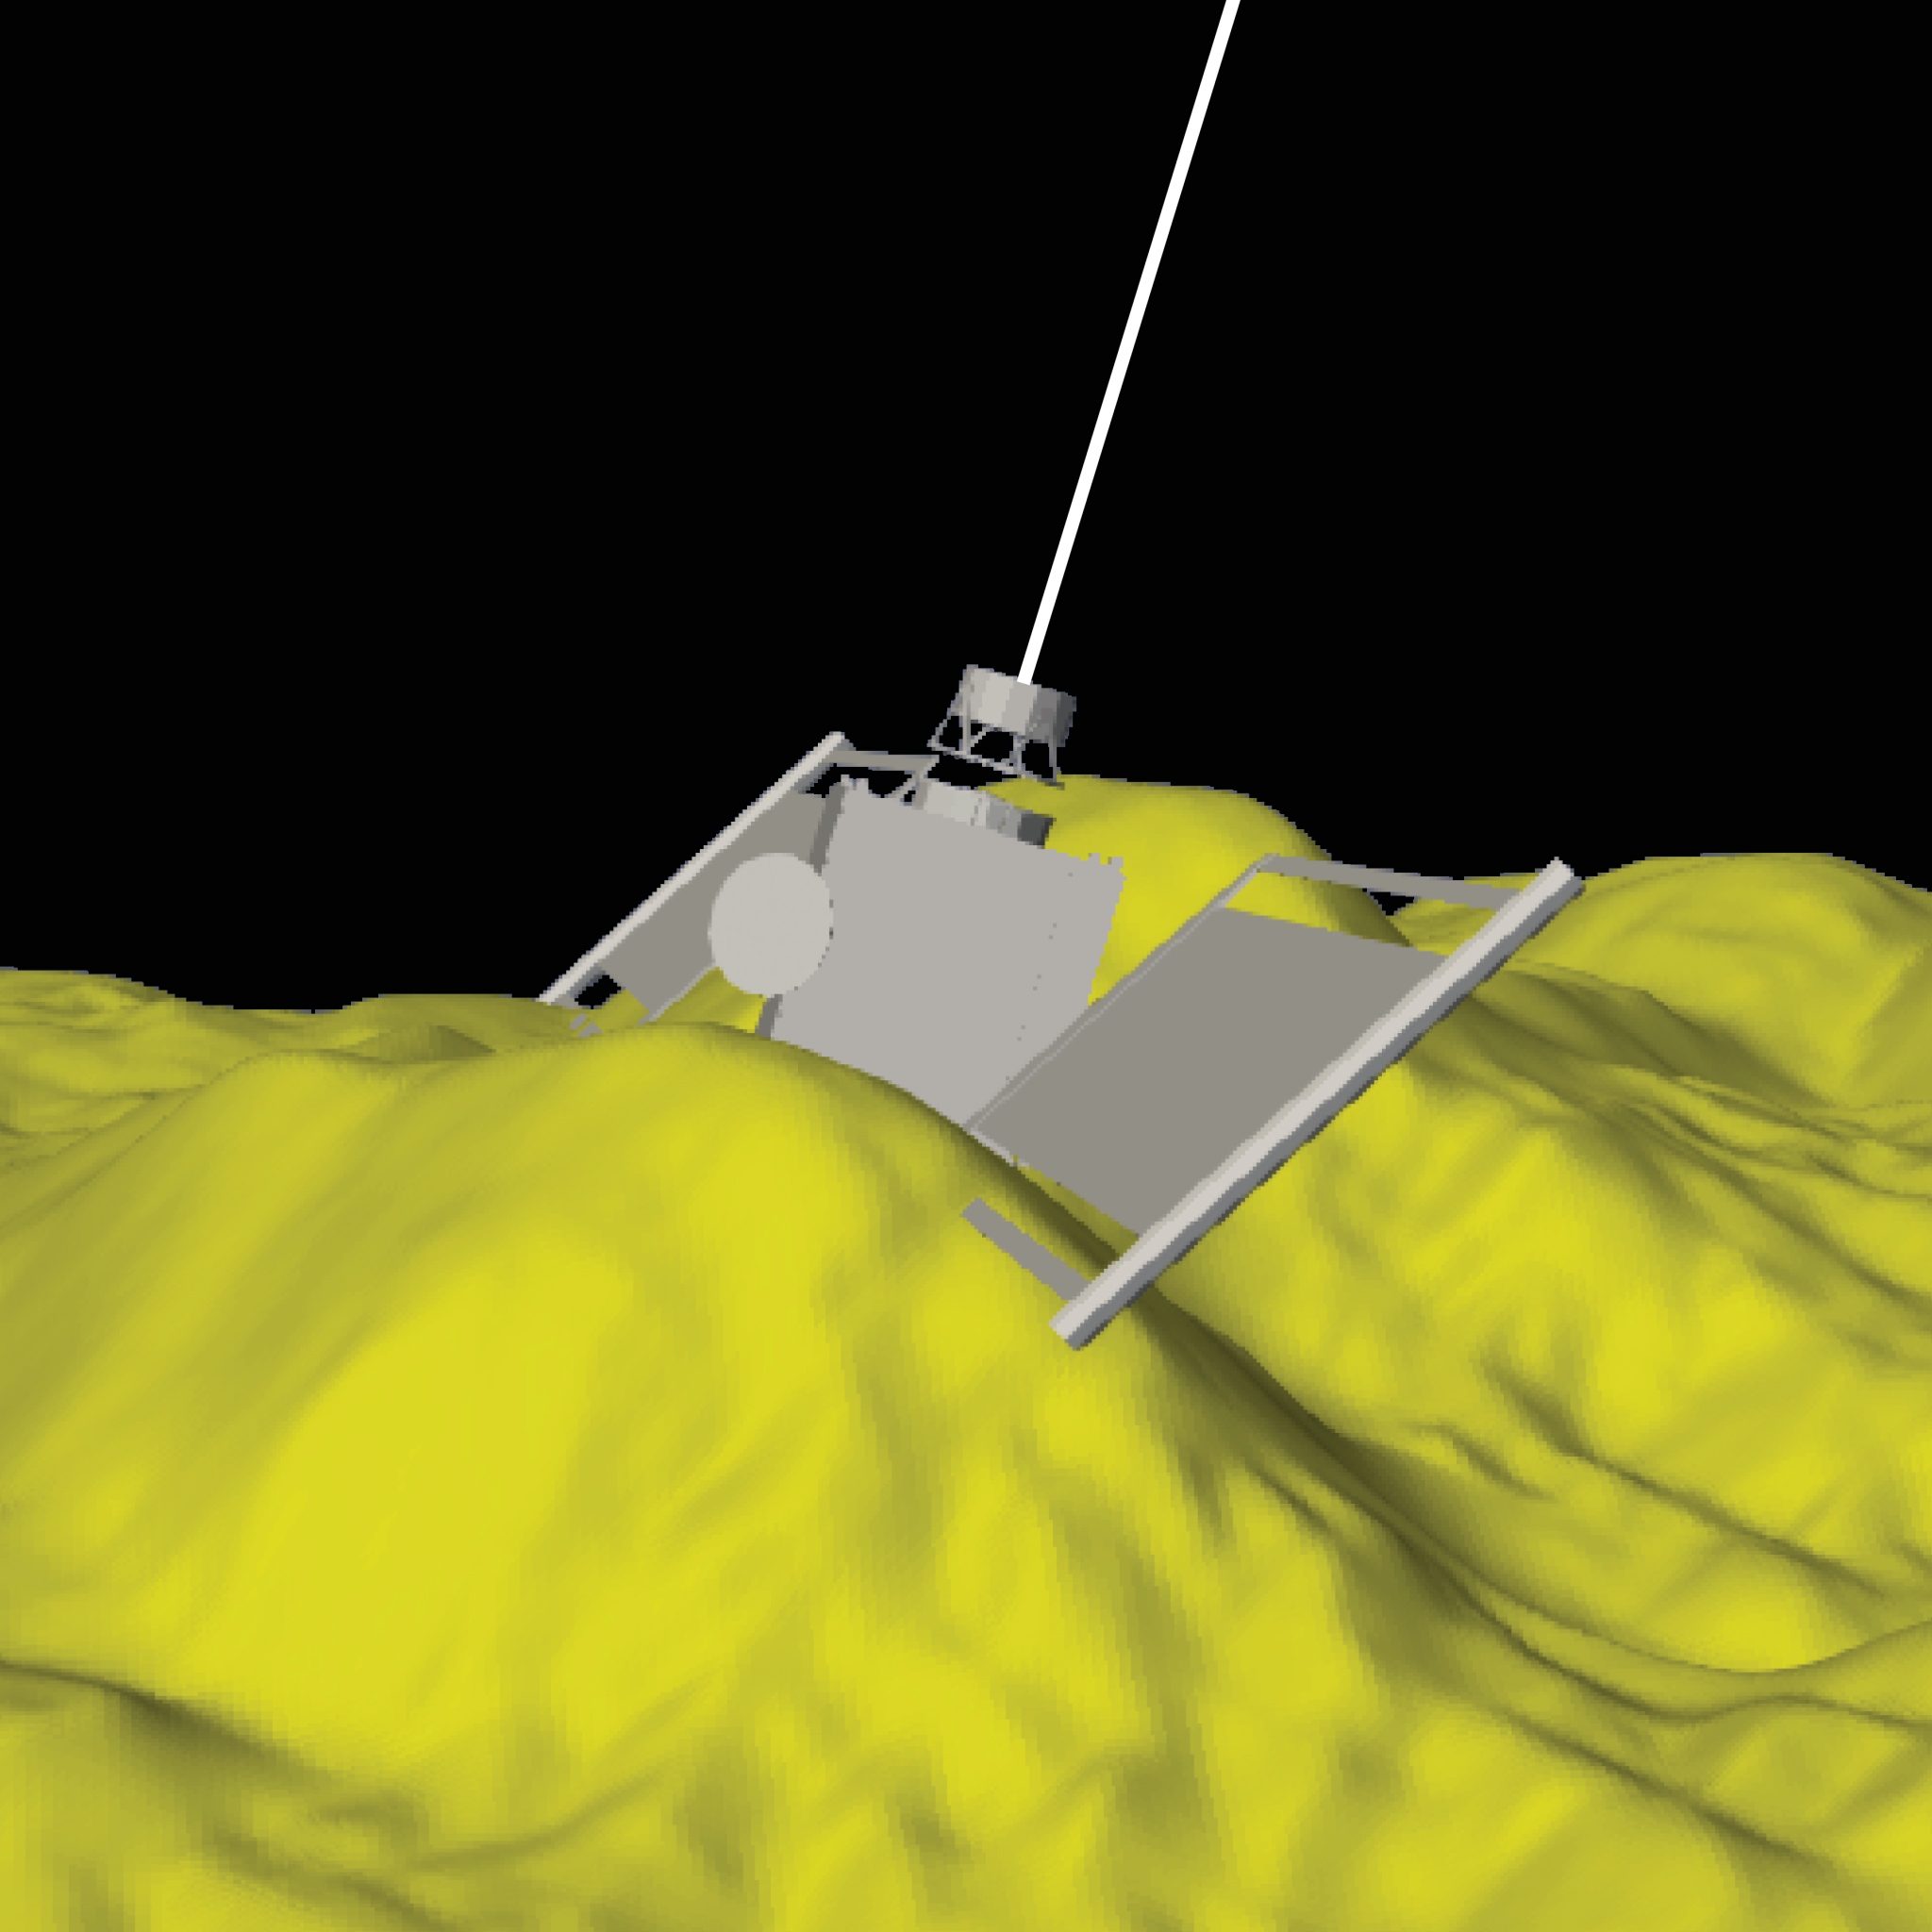 A 3D-drawn schematic shows the DART spacecraft crashing into the surface of asteroid Dimorphos, which is depicted in yellow